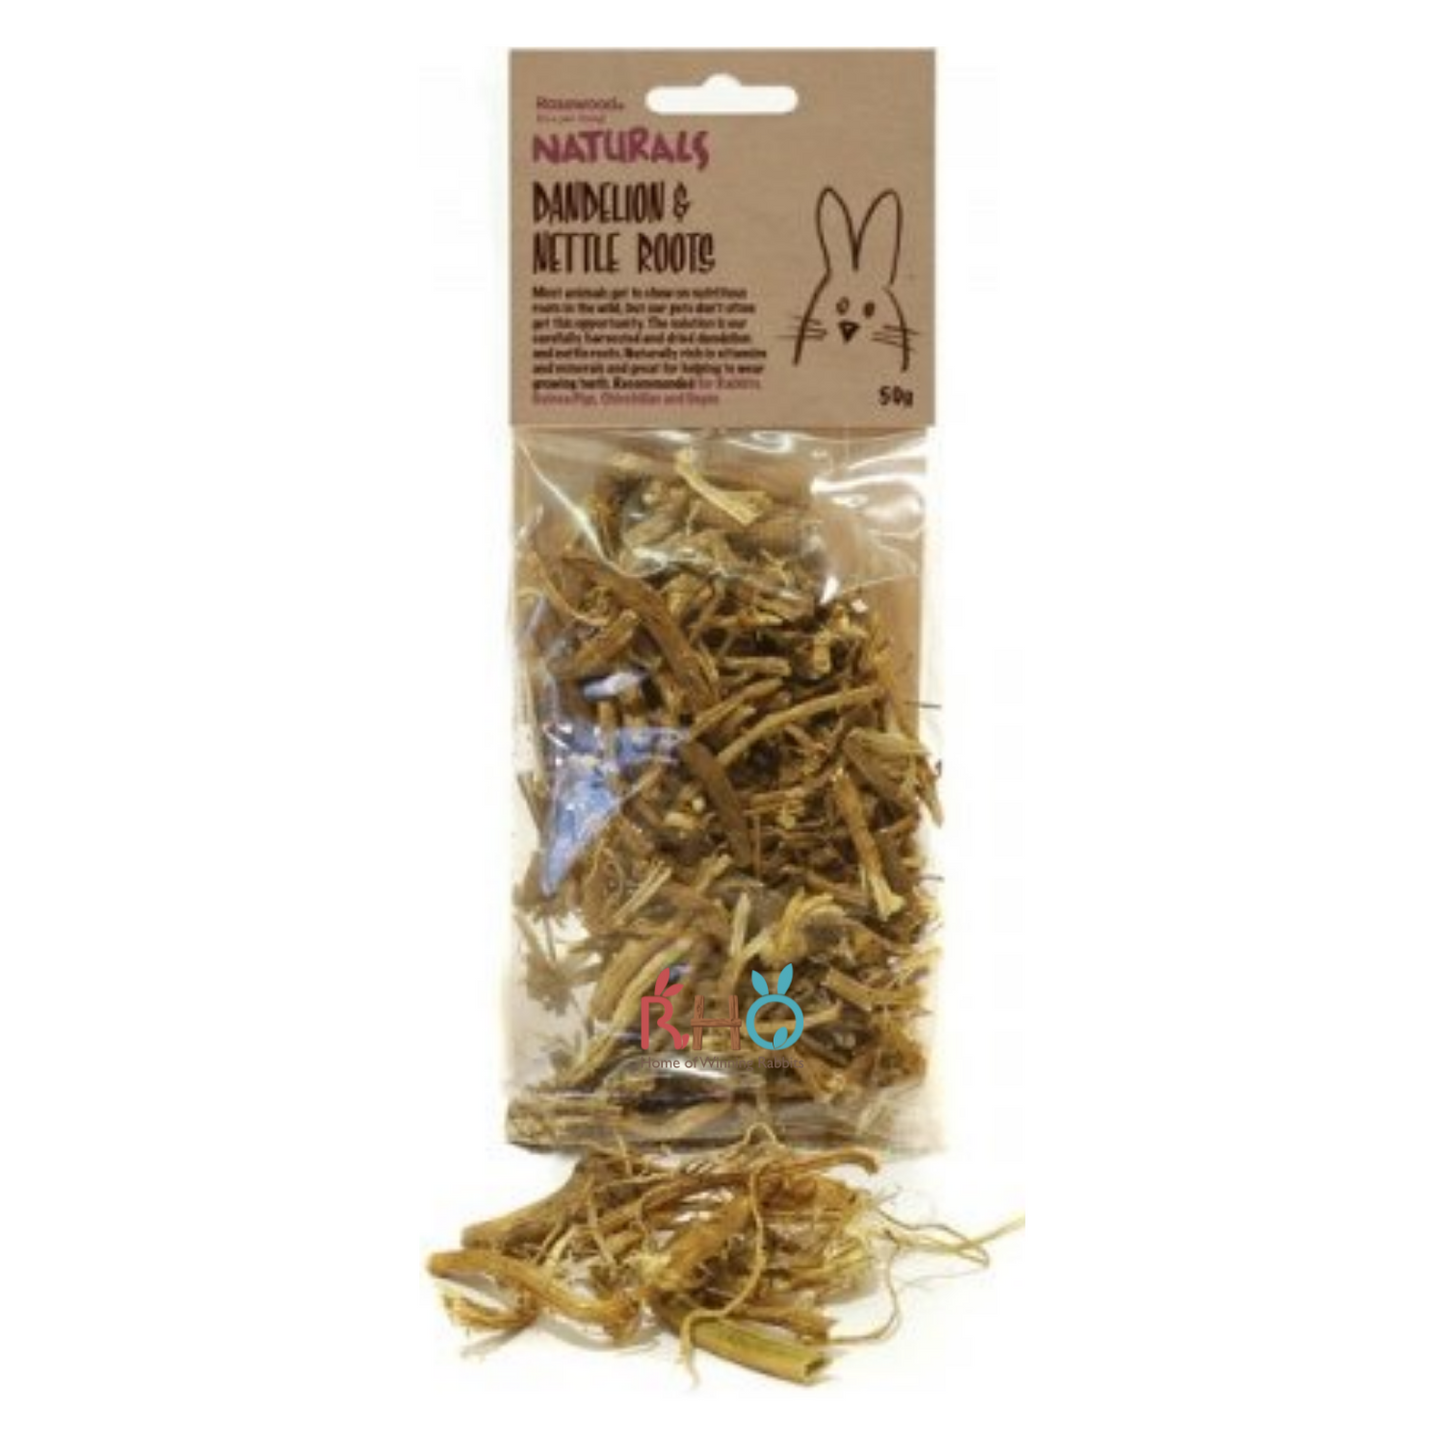 Rosewood - Dandelion and Nettle Roots 50g